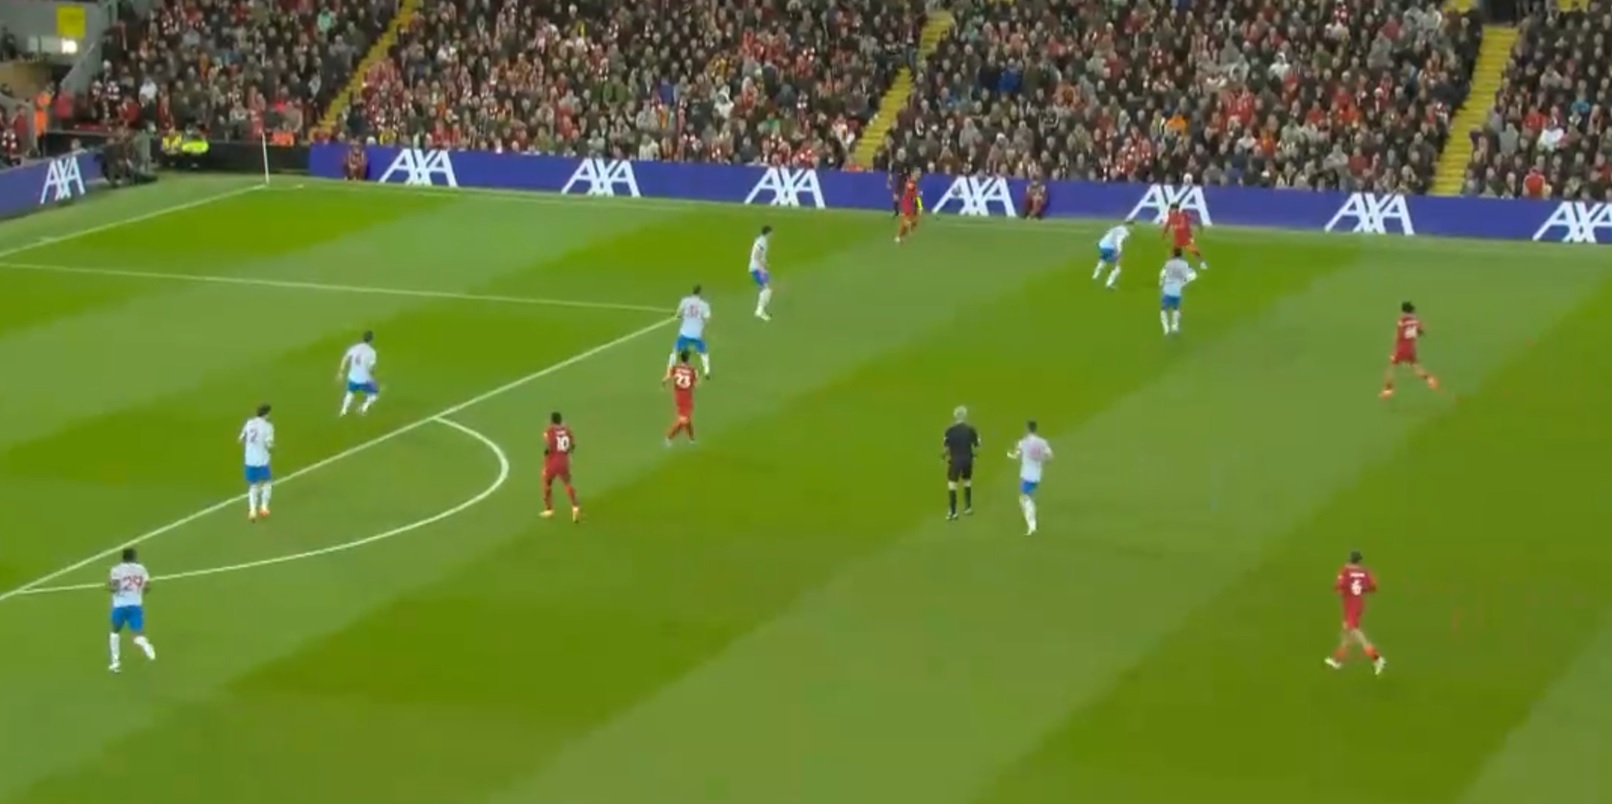 (Video) Watch glorious 25-pass move that led to Mo Salah’s goal drought-ending effort